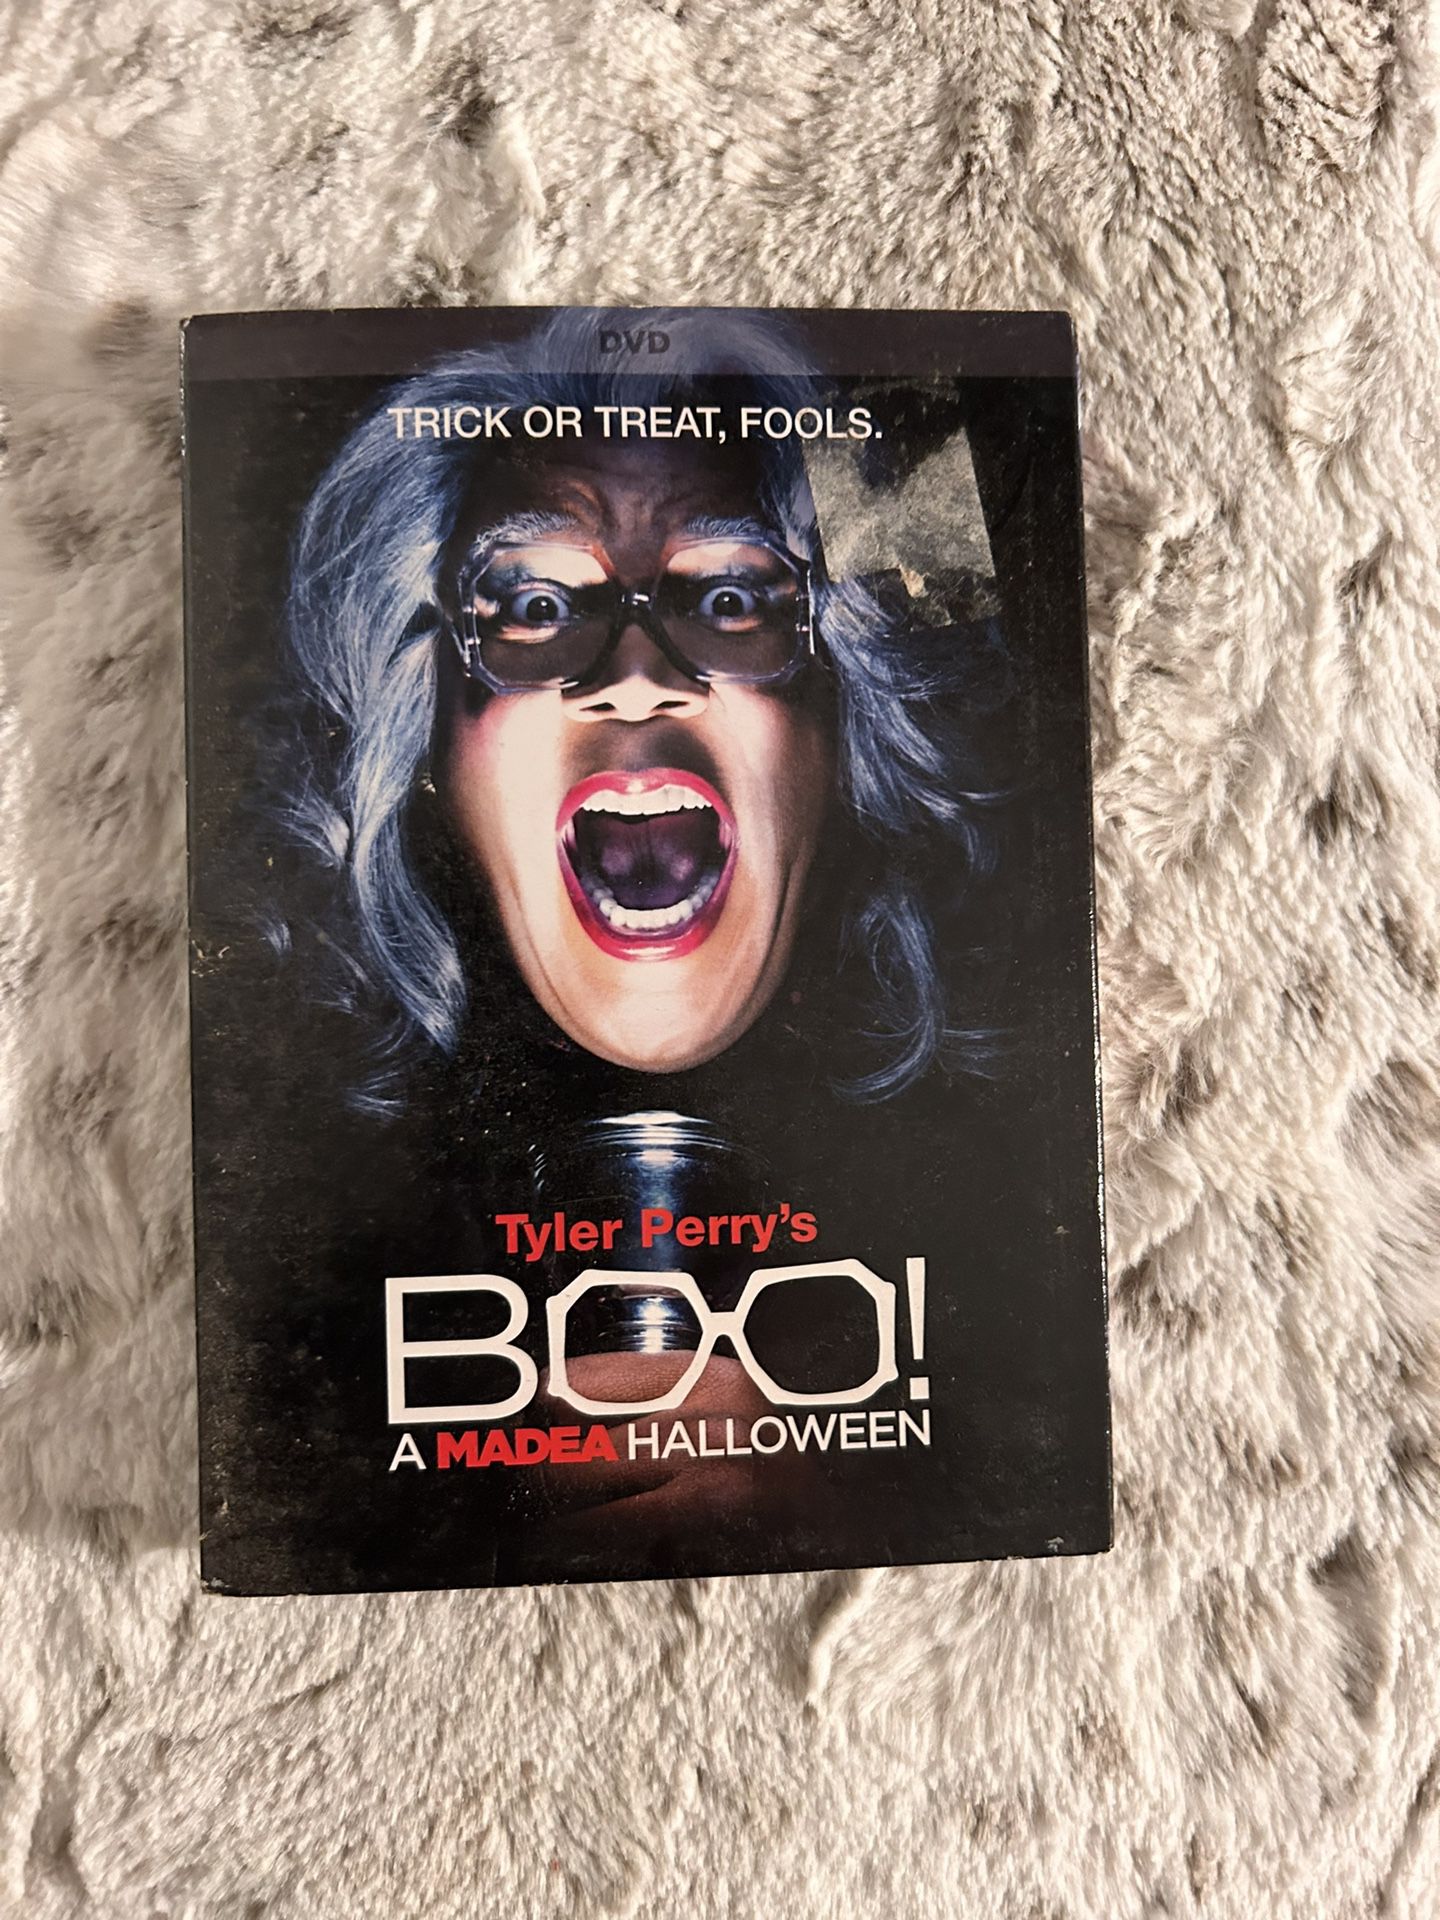 Boo! Movie For Sale!